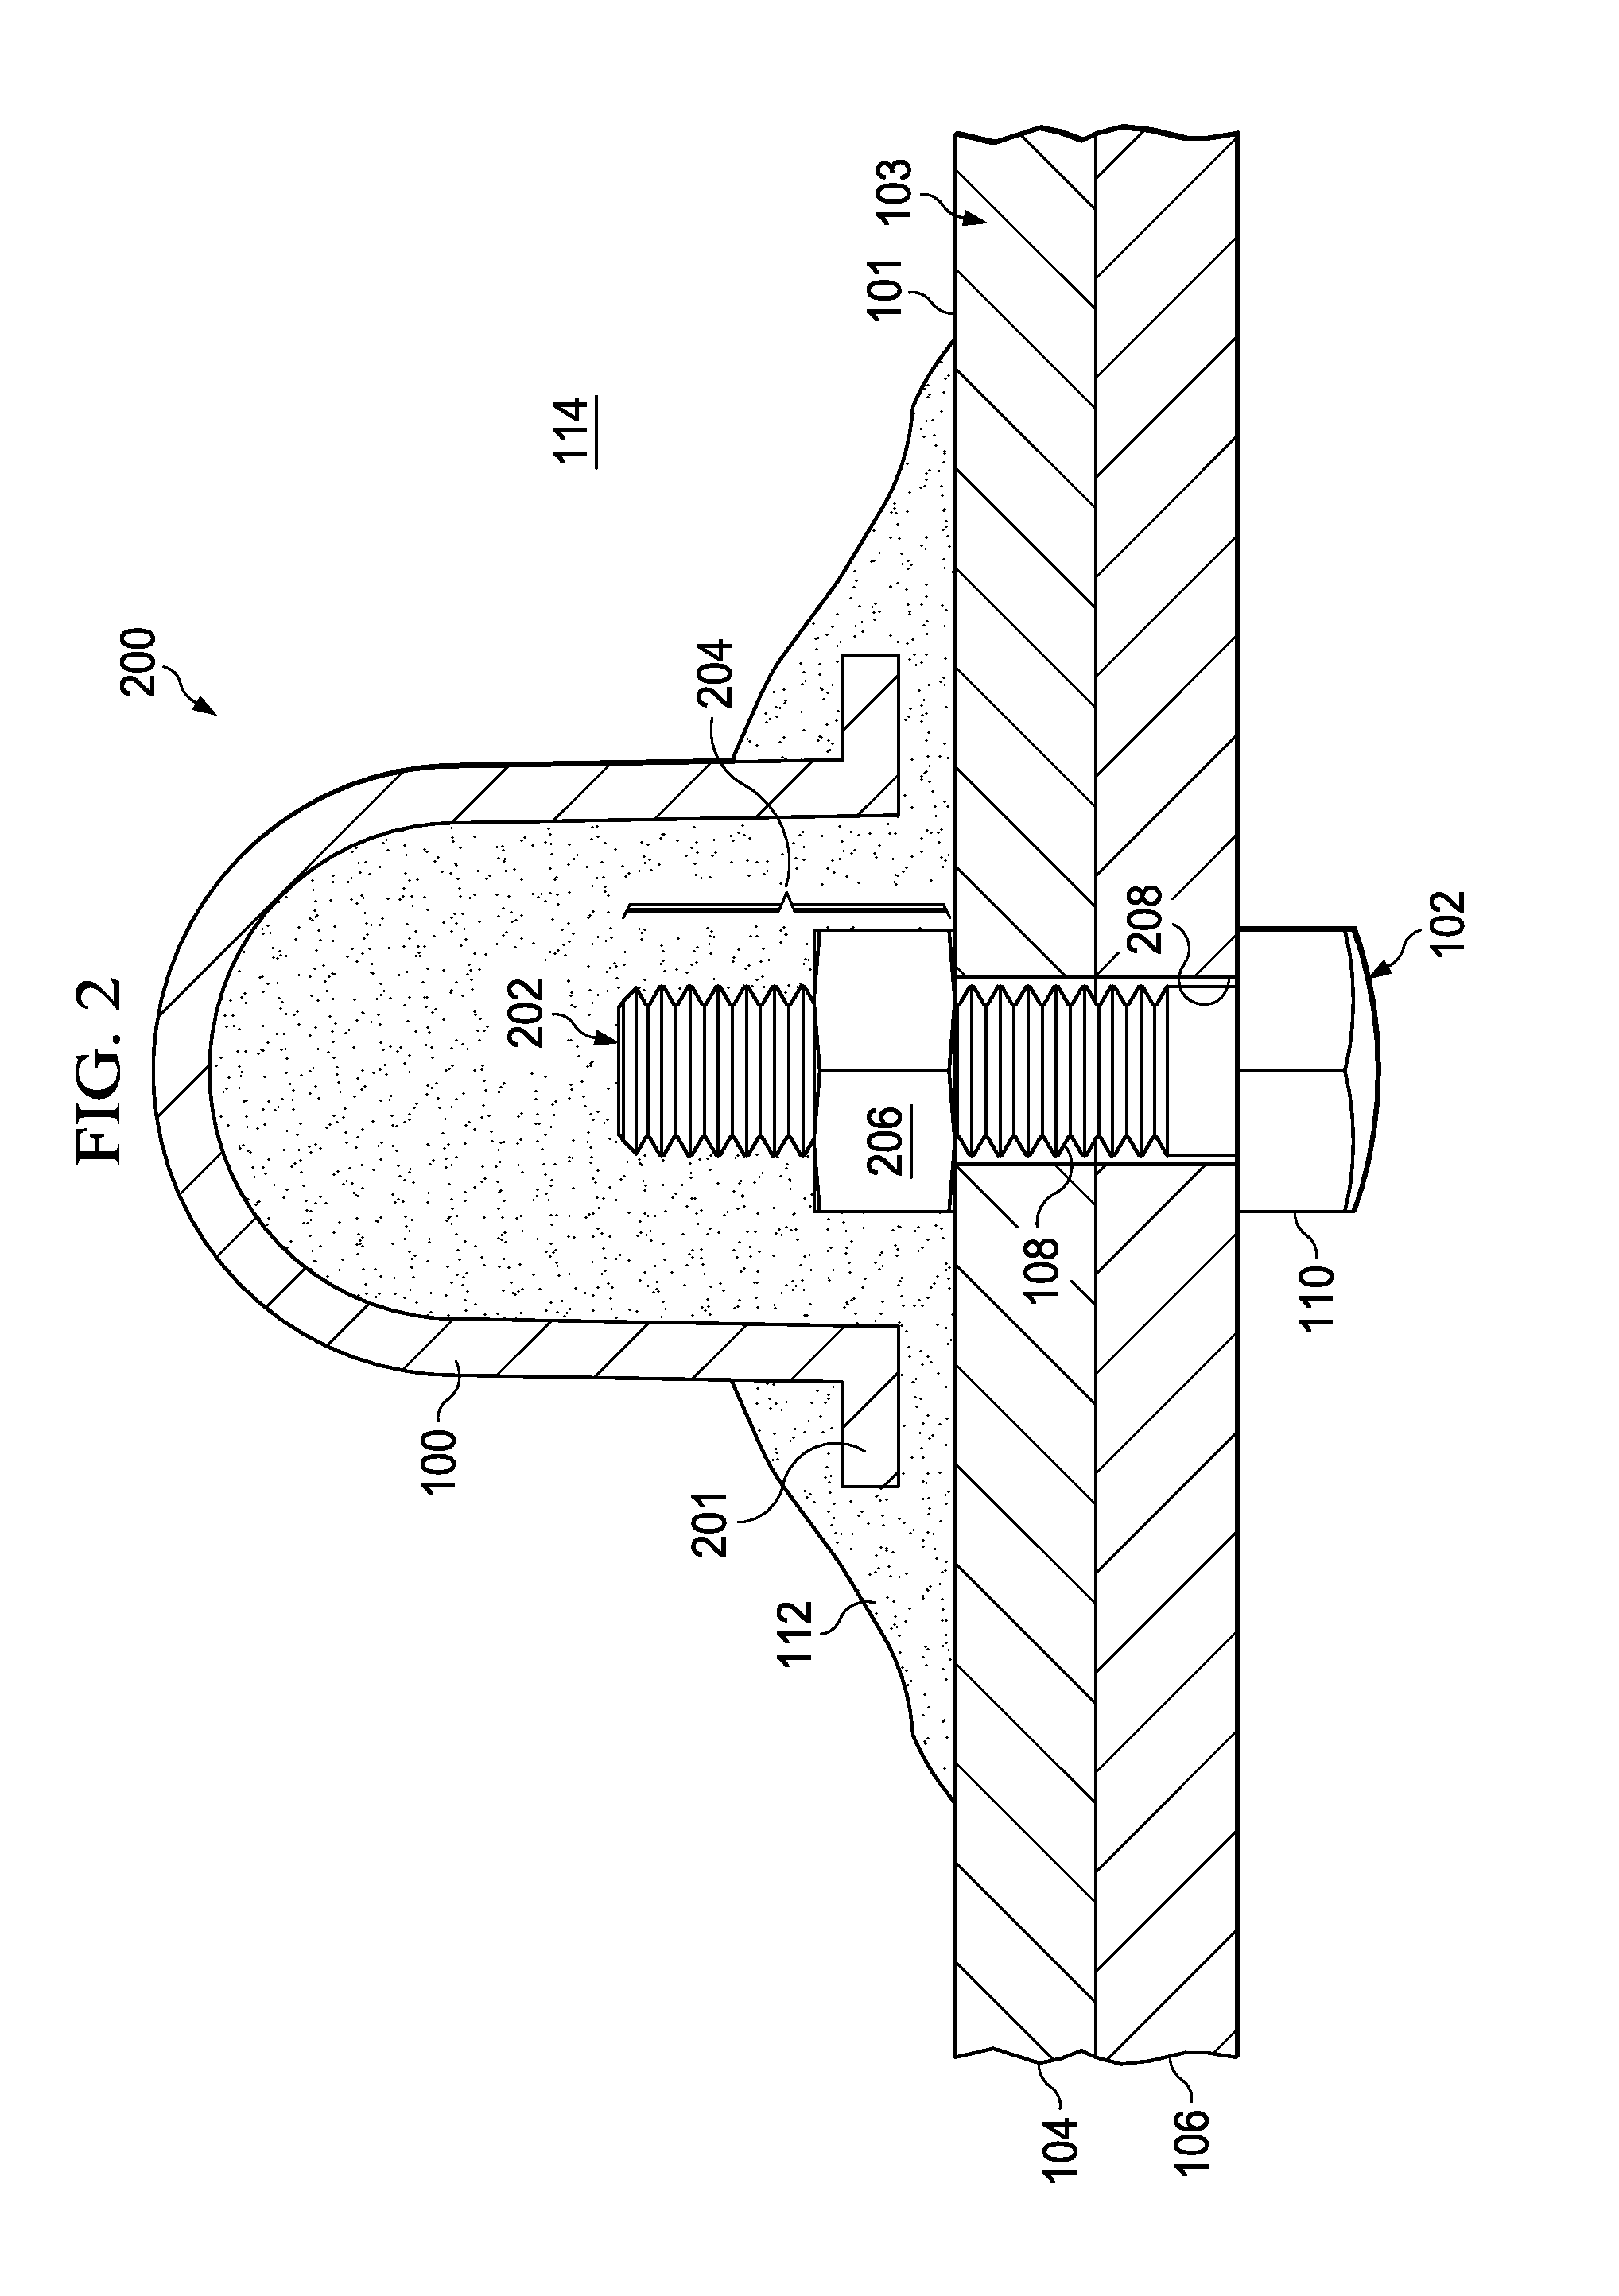 Method and apparatus for covering a fastener system